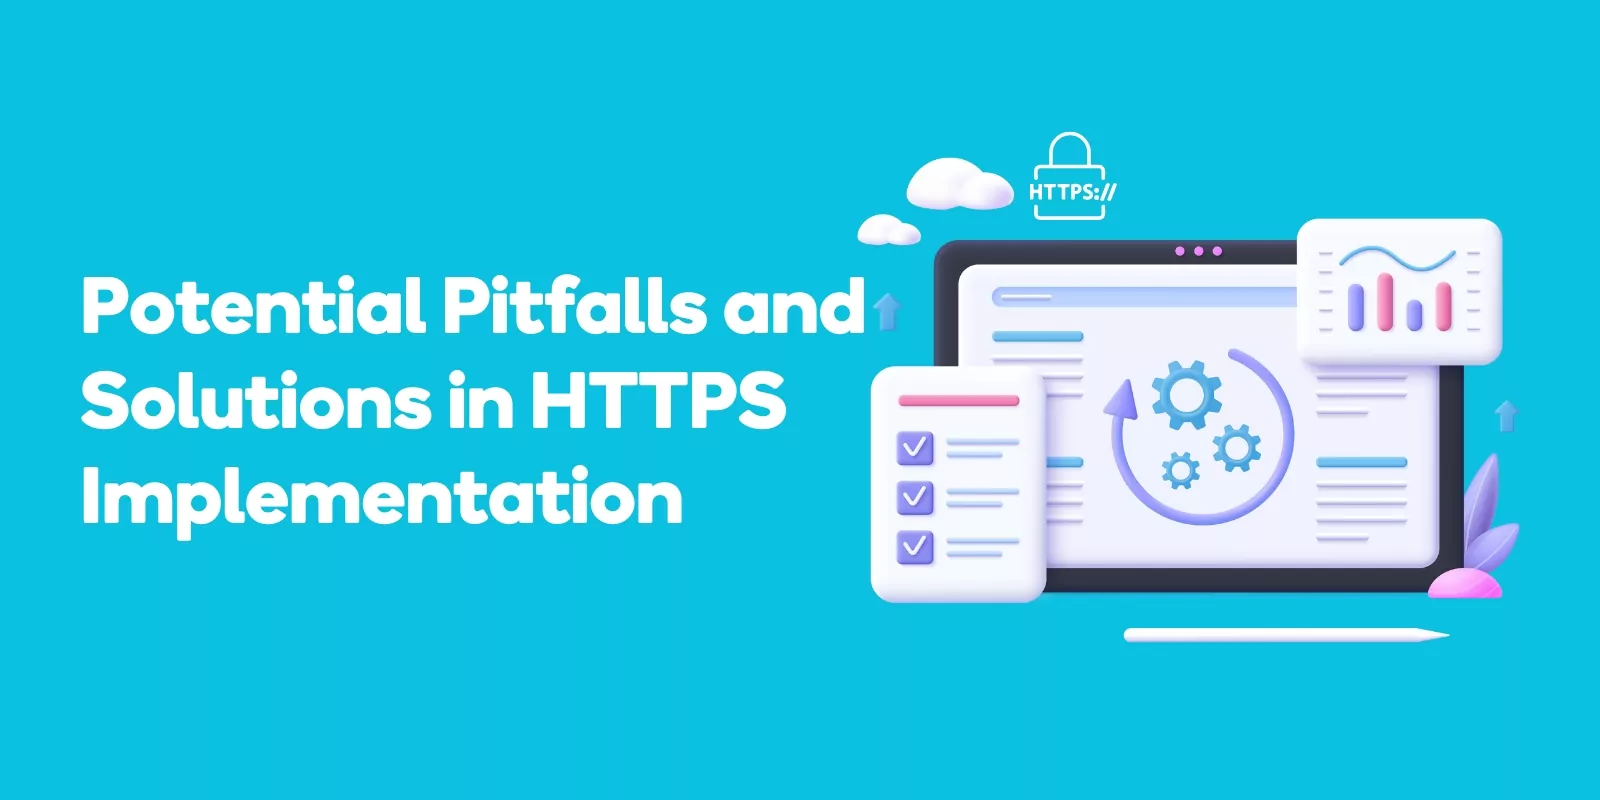 Potential Pitfalls and Solutions in HTTPS Implementation